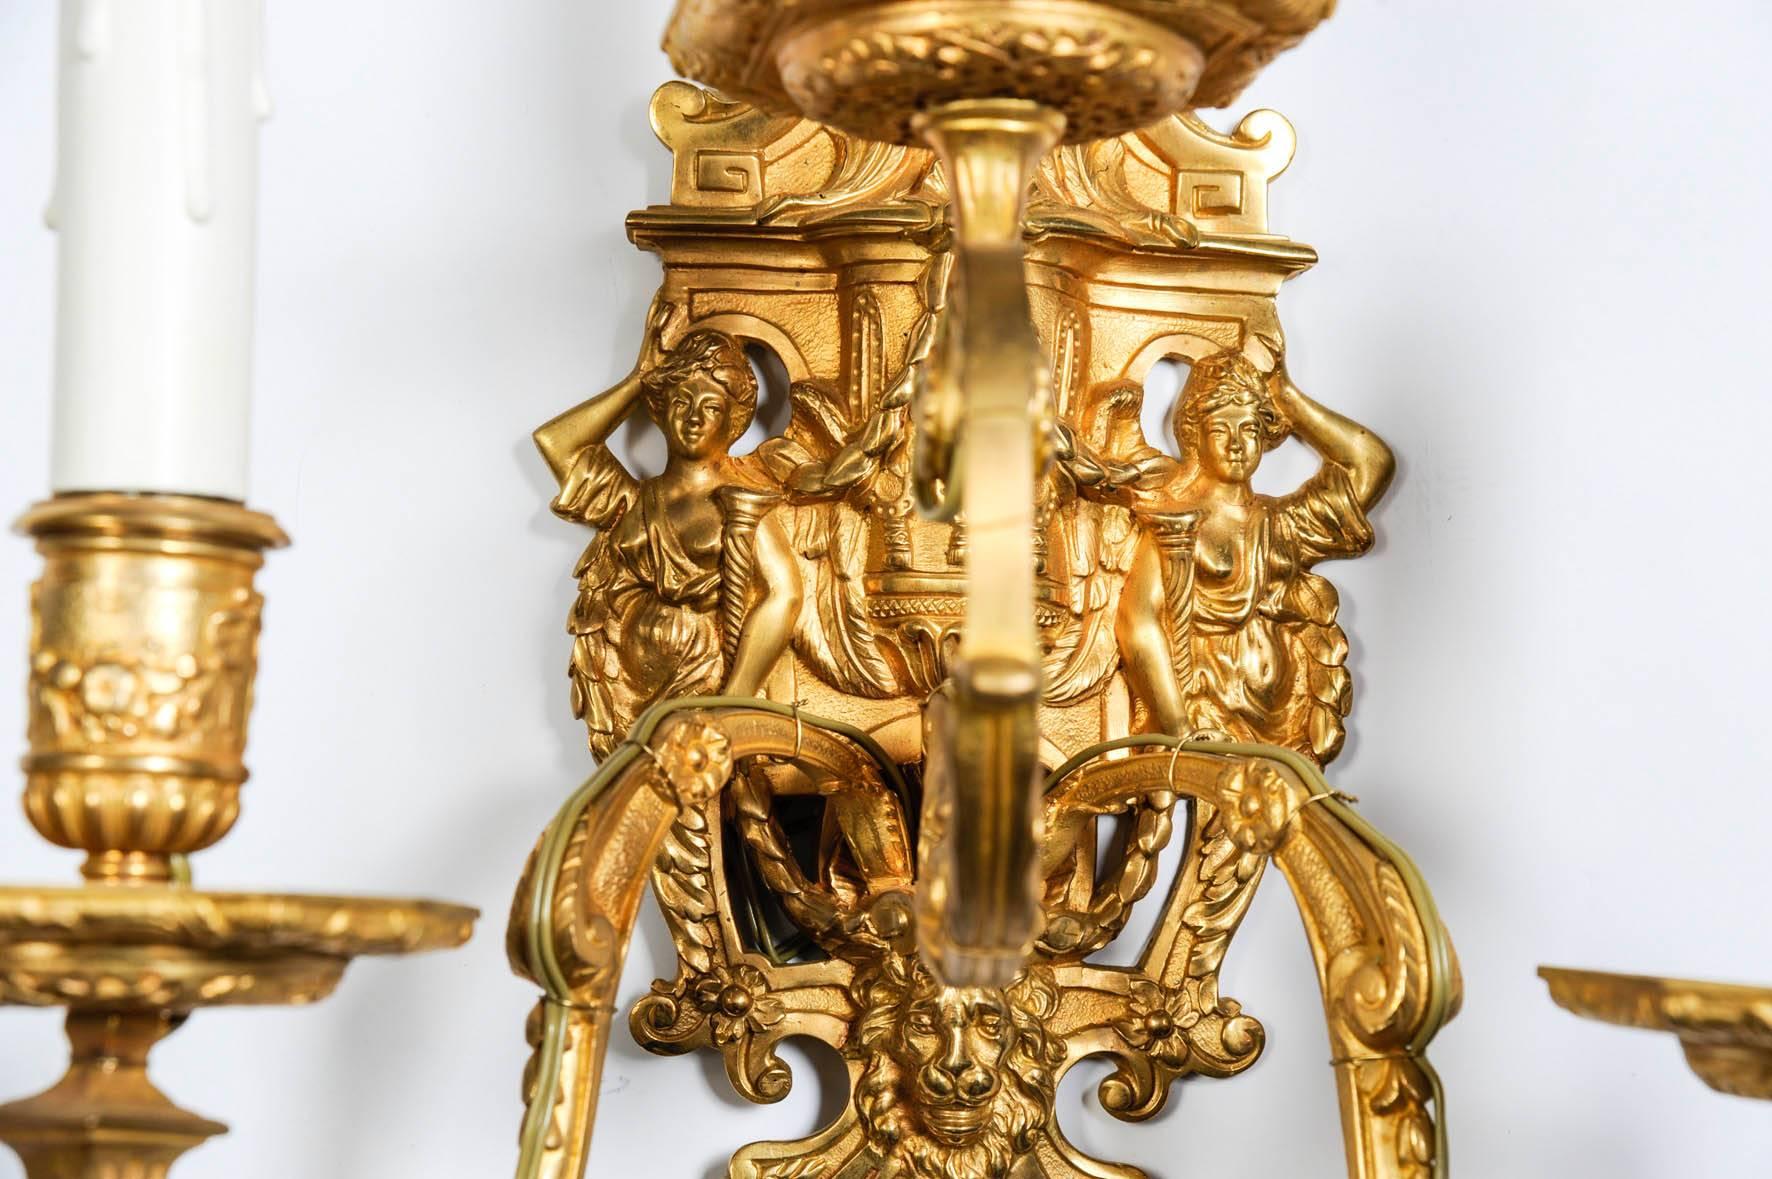 Four gilded bronze sconces in the style of Louis XIV
Two arms of light.